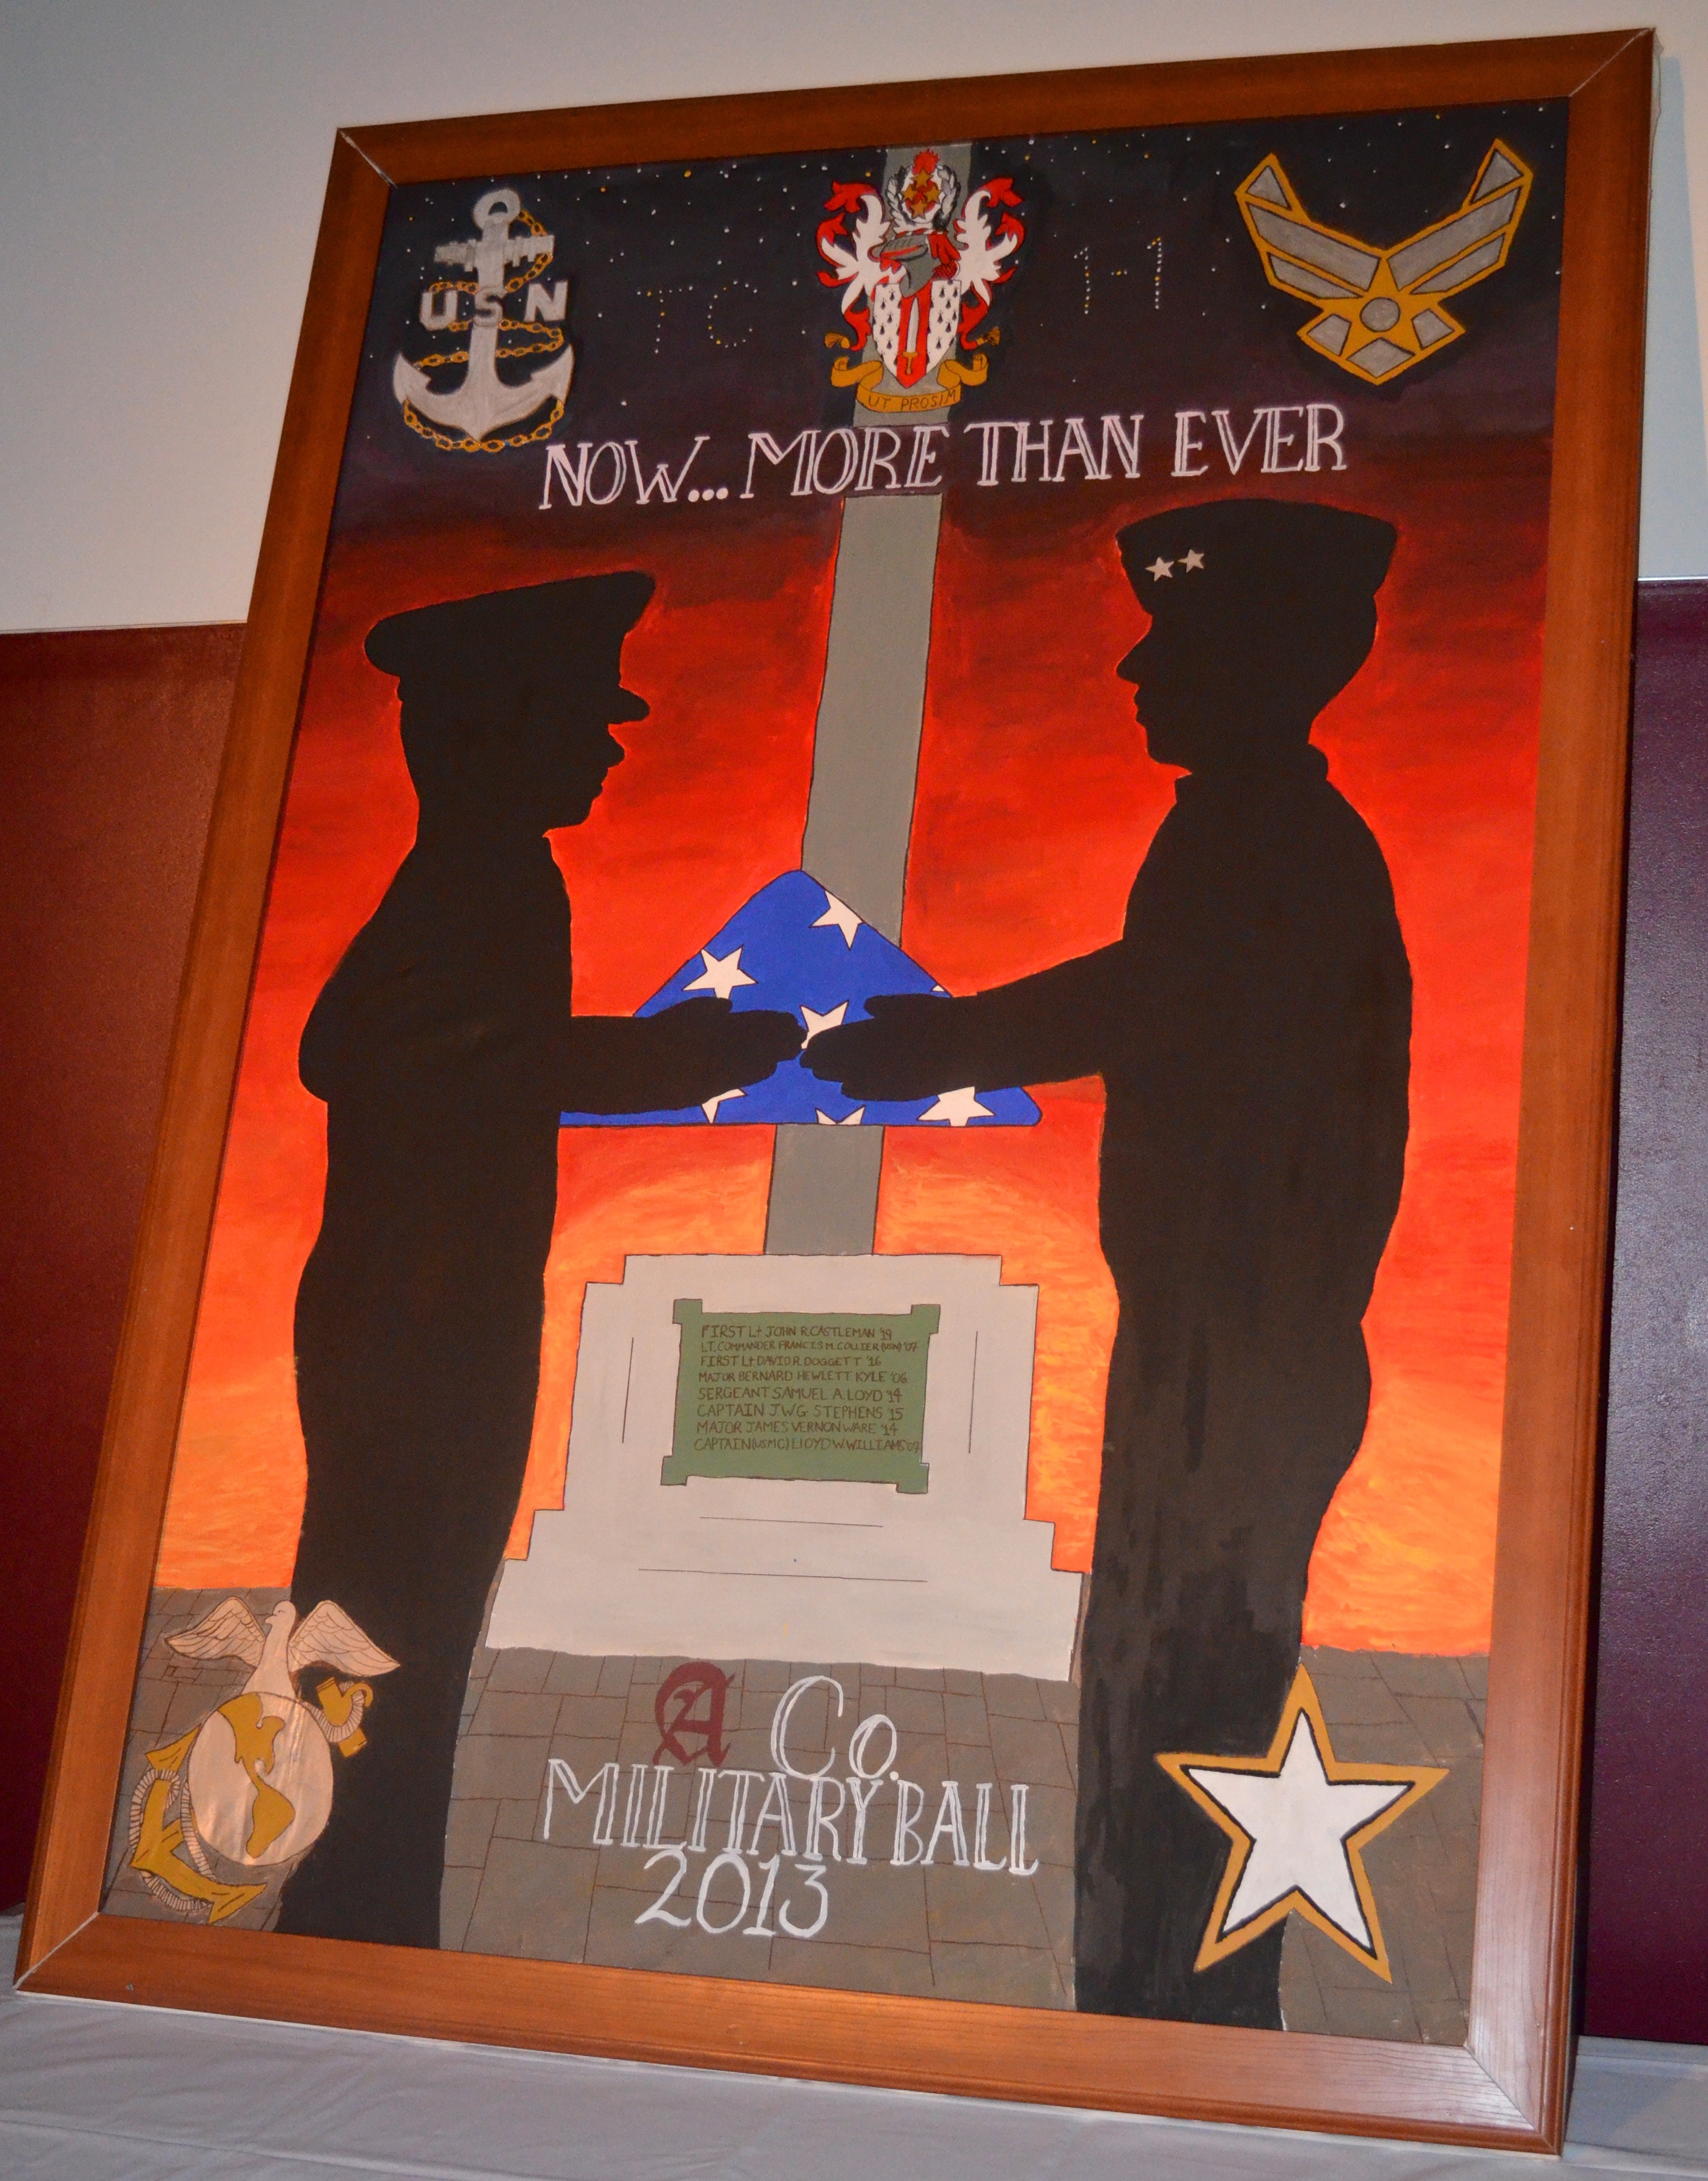 Each year the first year cadets from each company create a banner focusing on the theme of the Military Ball. This is the 2013 banner for Alpha Company.